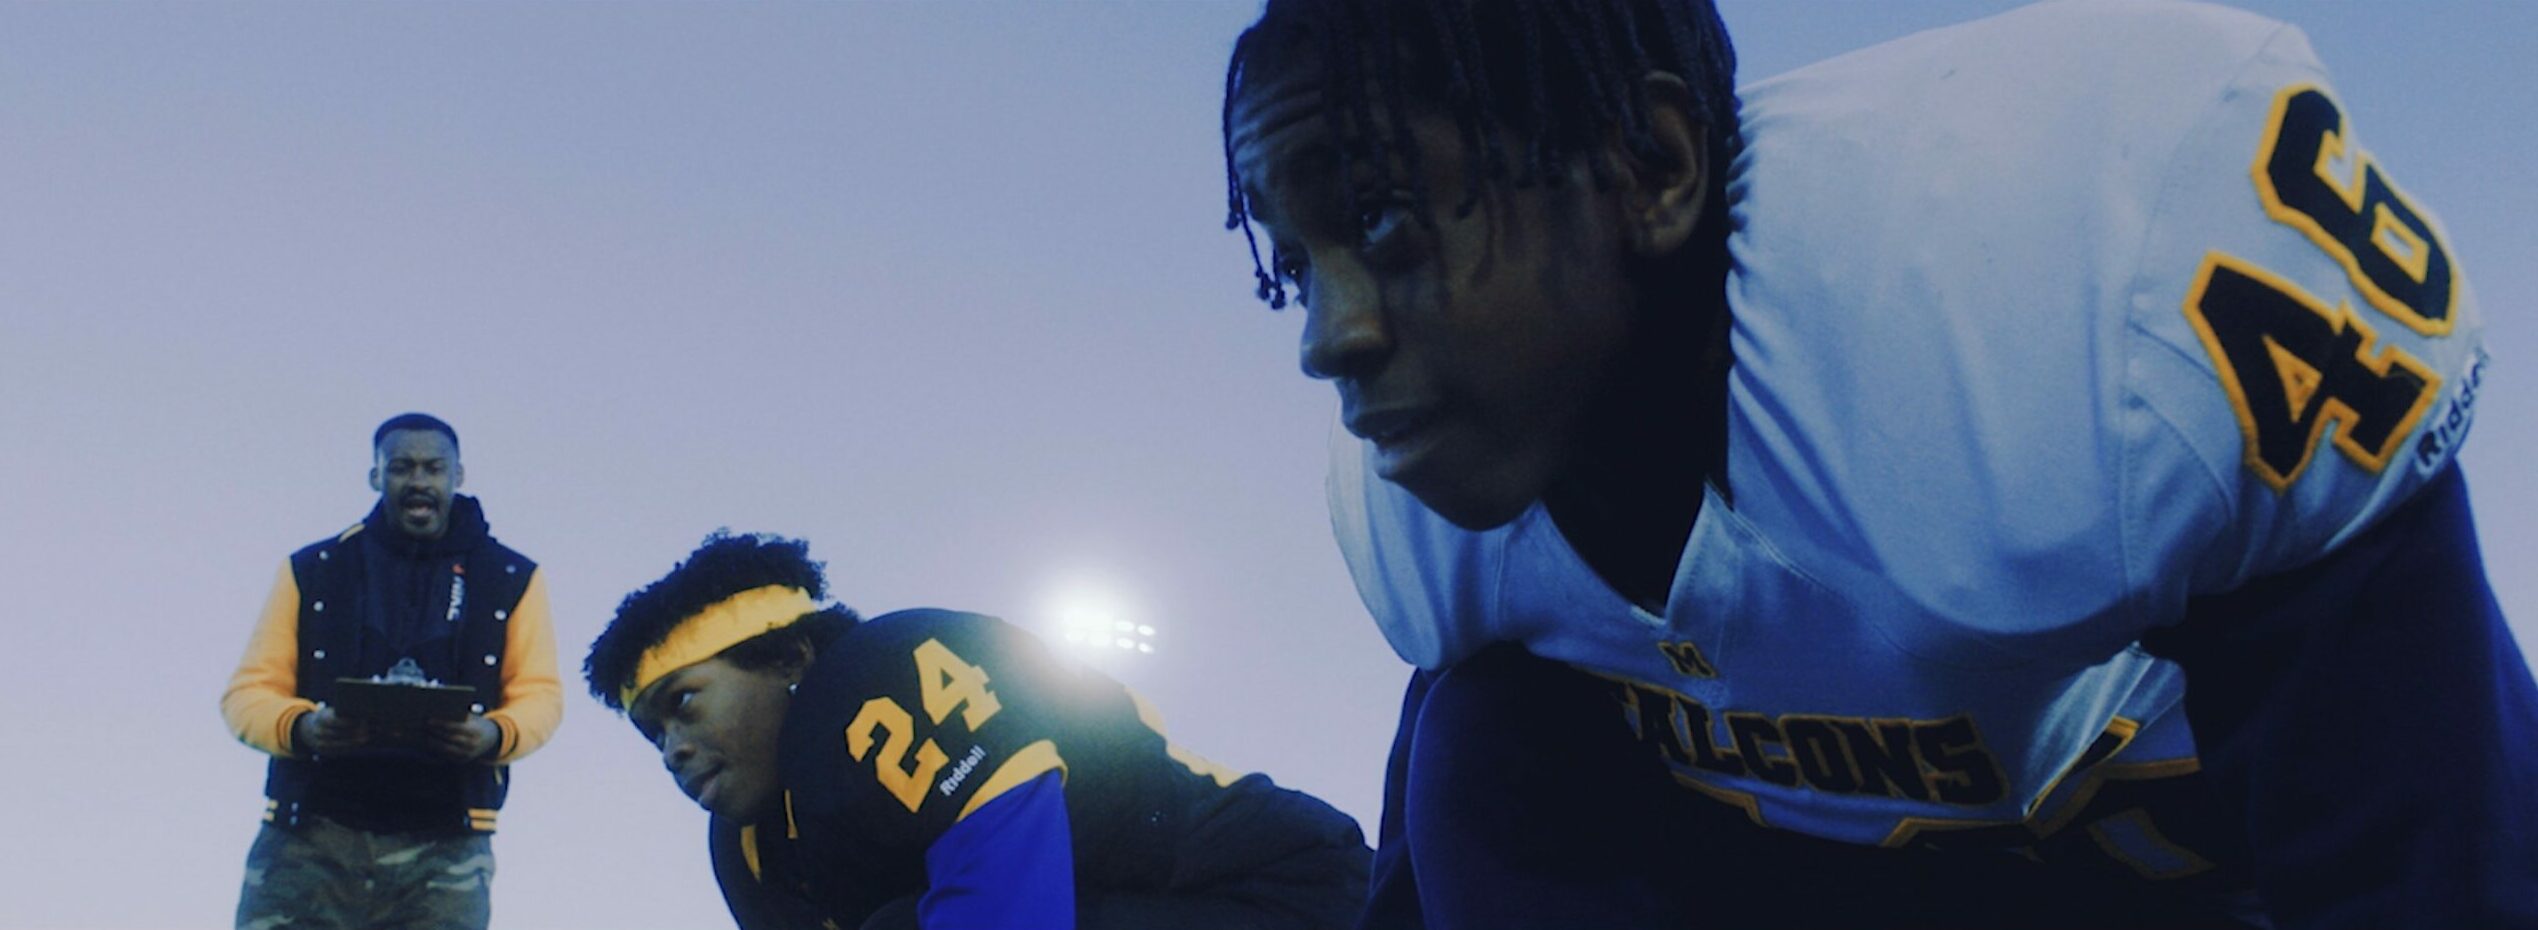 Screenshot from Khalil's film Pass Da Mic shows two actors in a scene wearing football gear and on a football field in closeup.